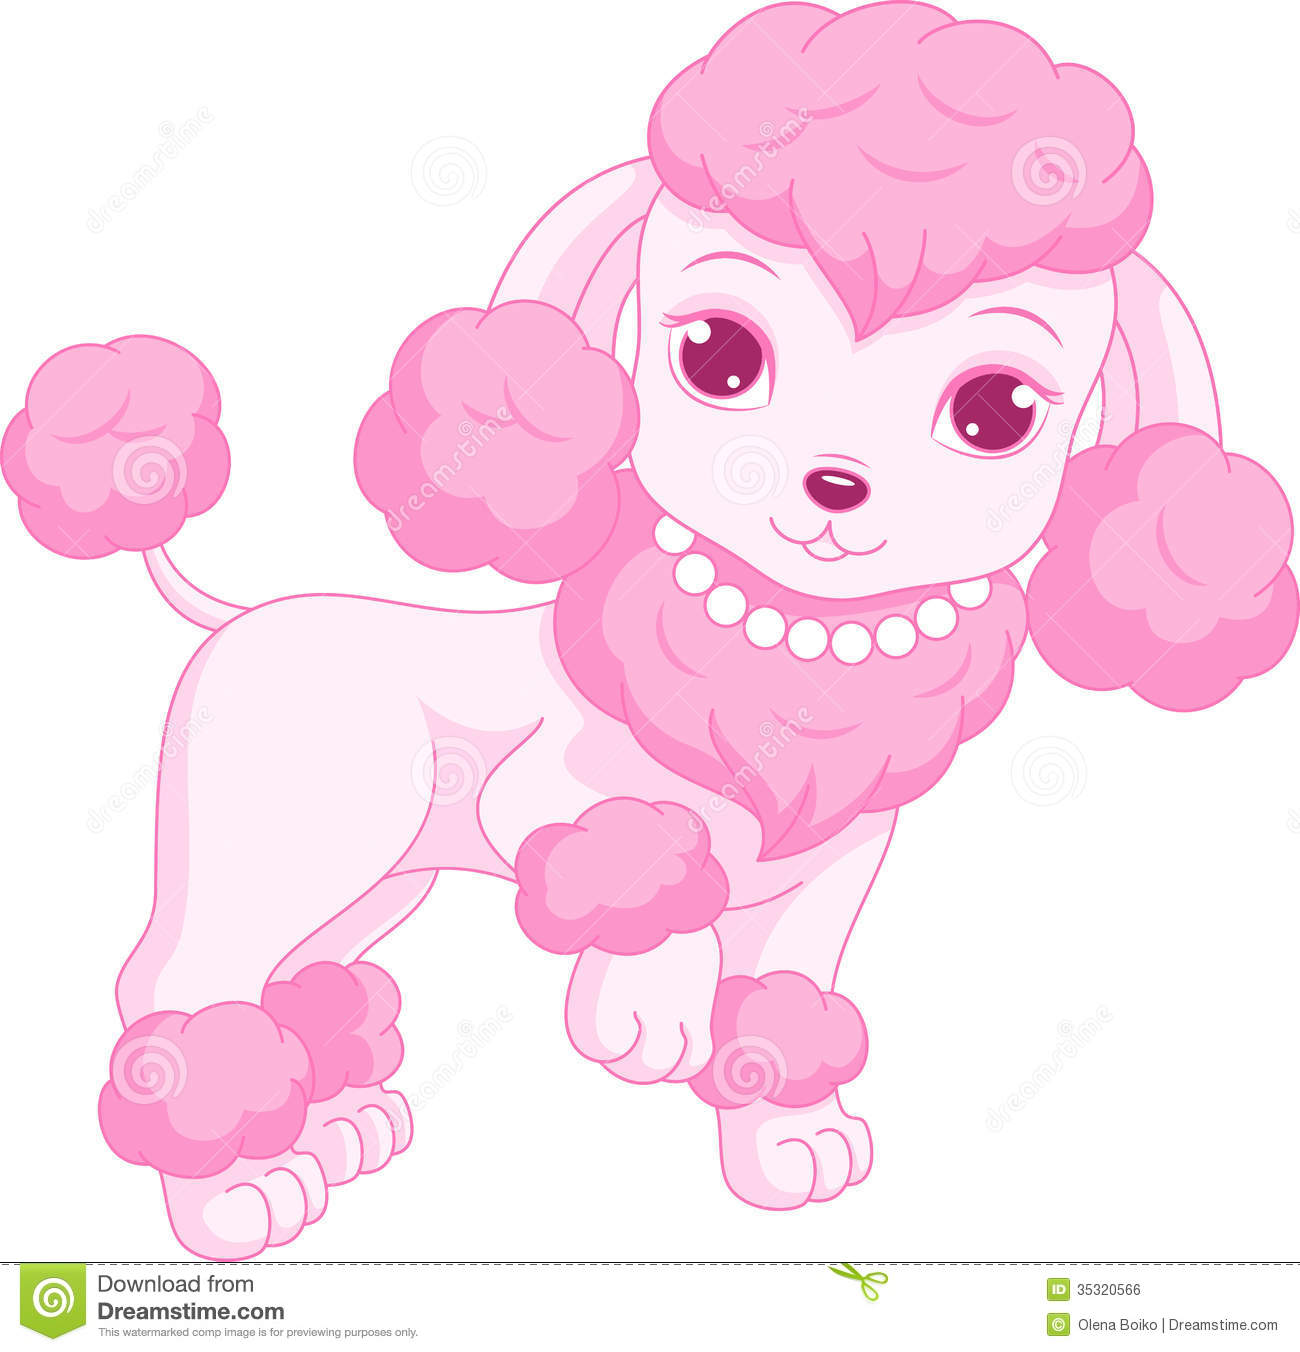 Showing post & media for Toy poodle cartoon.